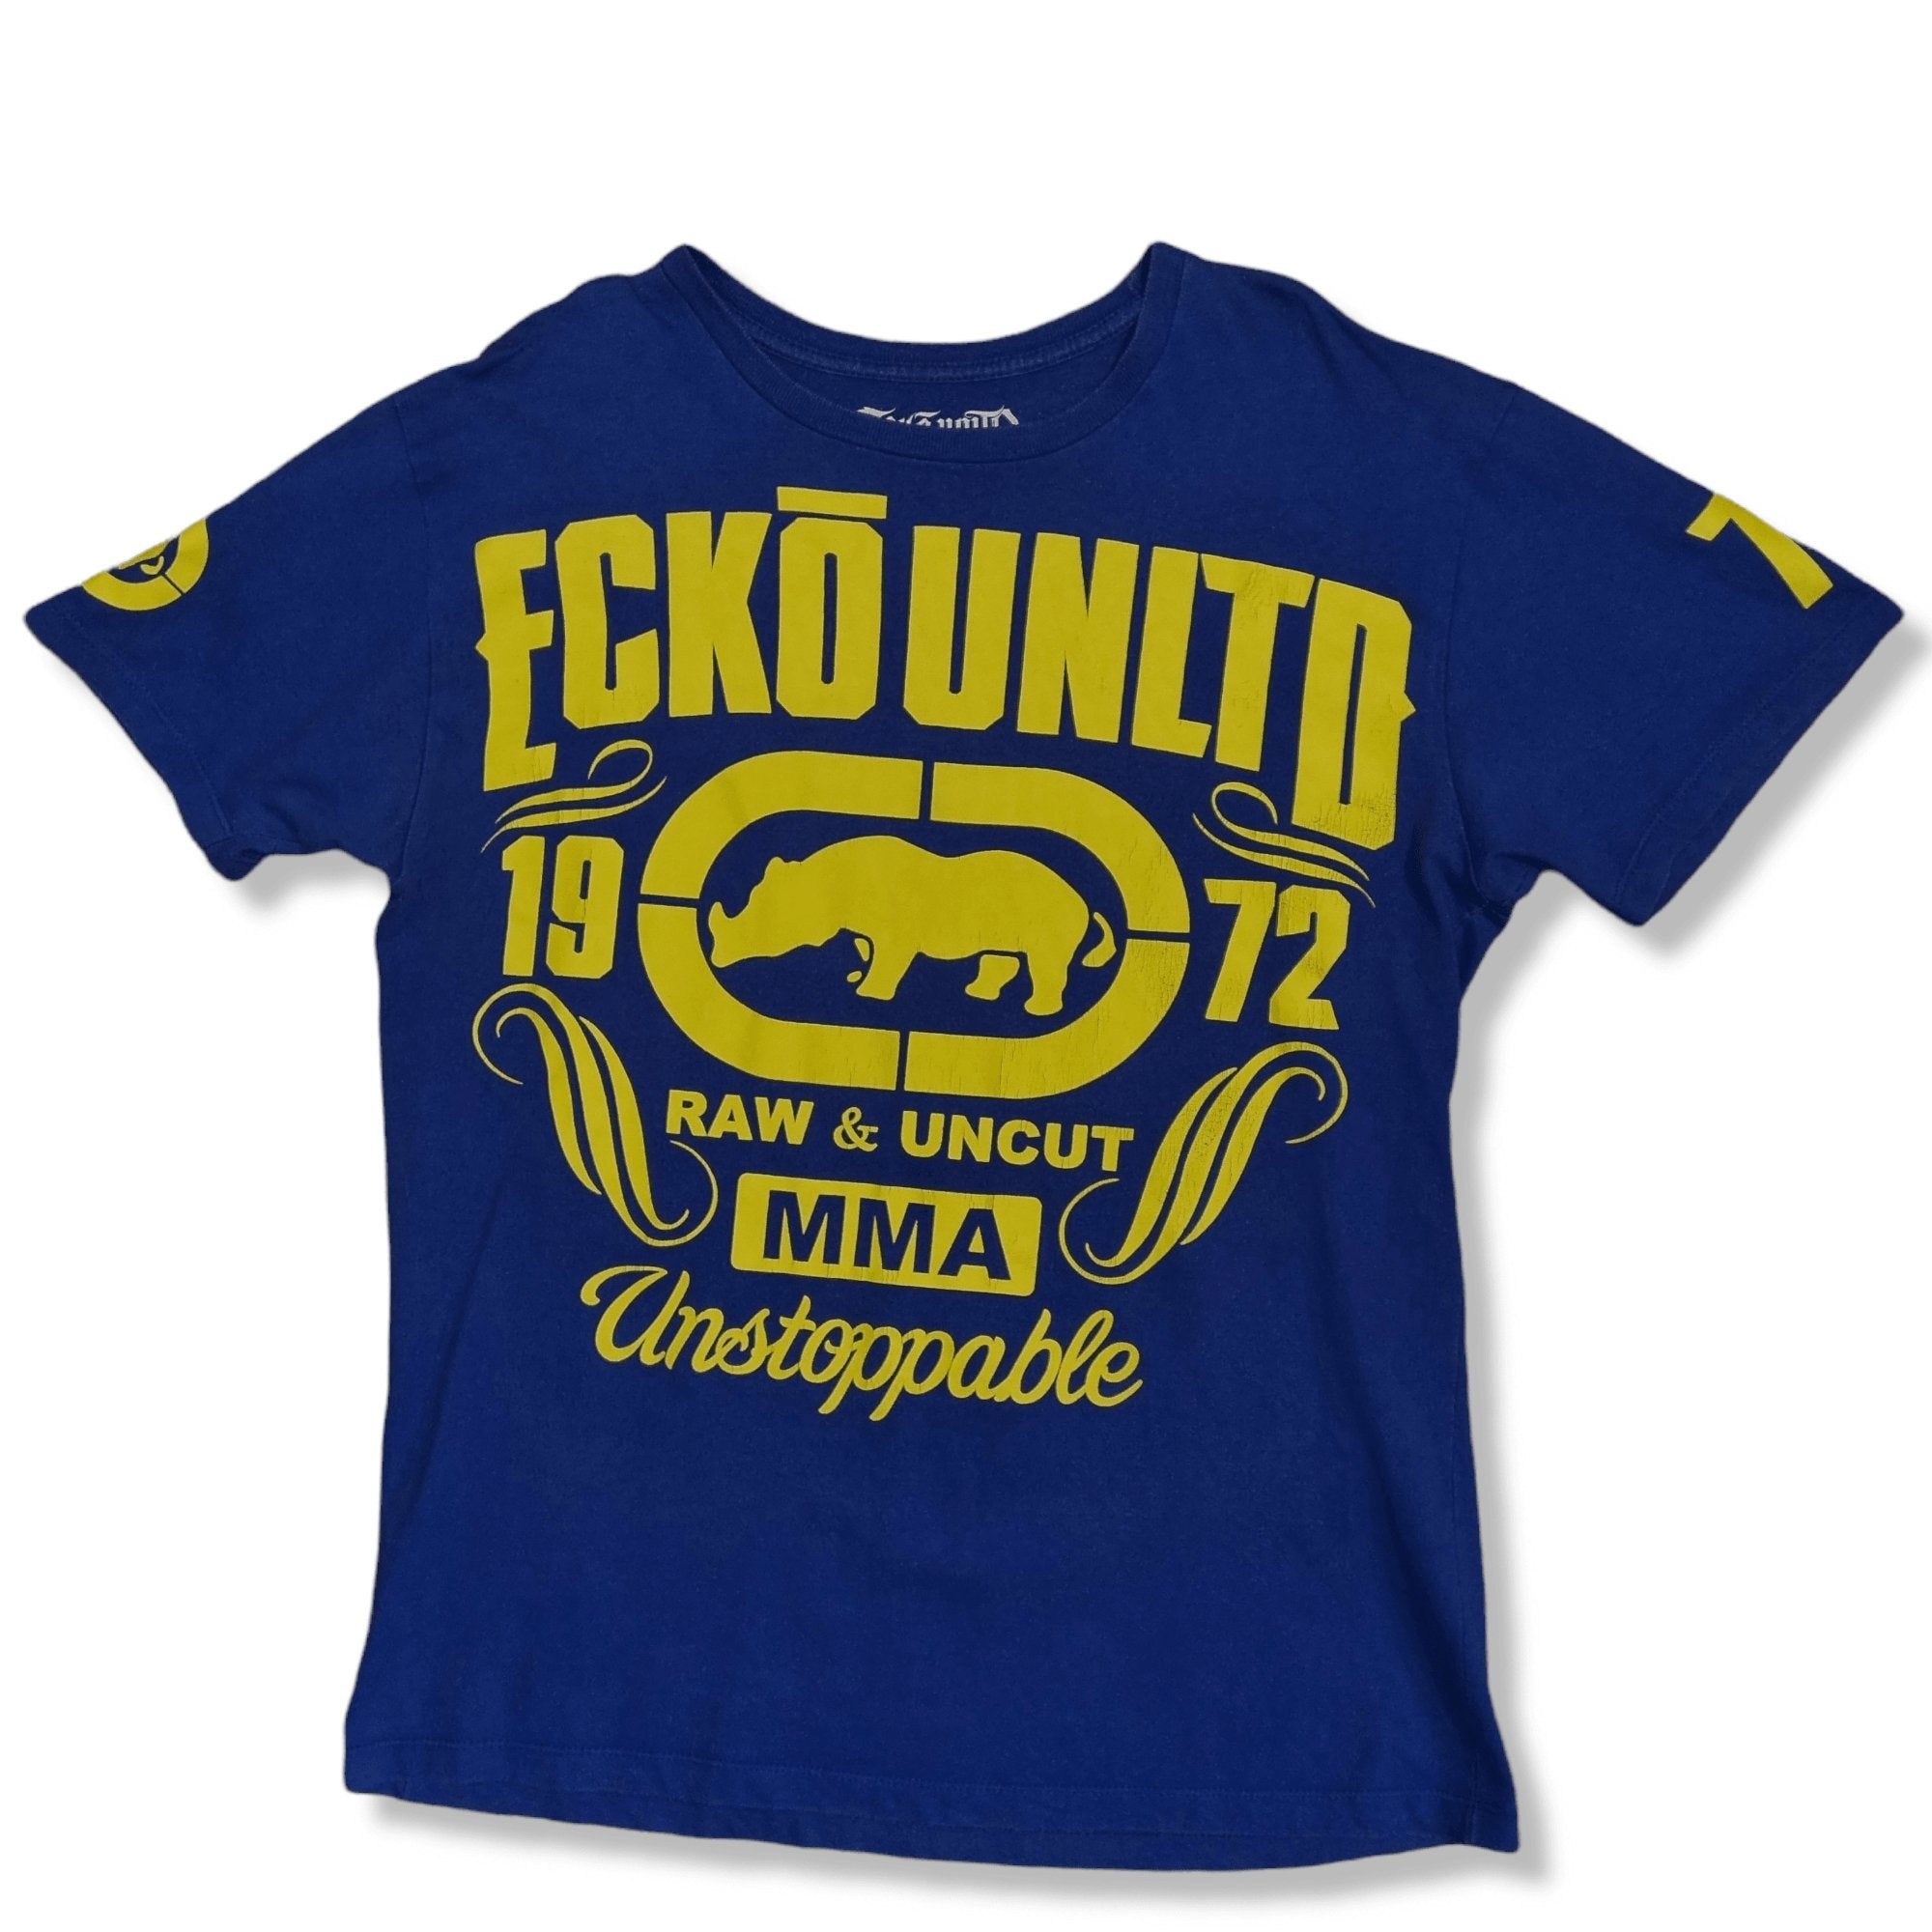 T-shirt Ecko Unlimited (S/M) - oldstyleclothing